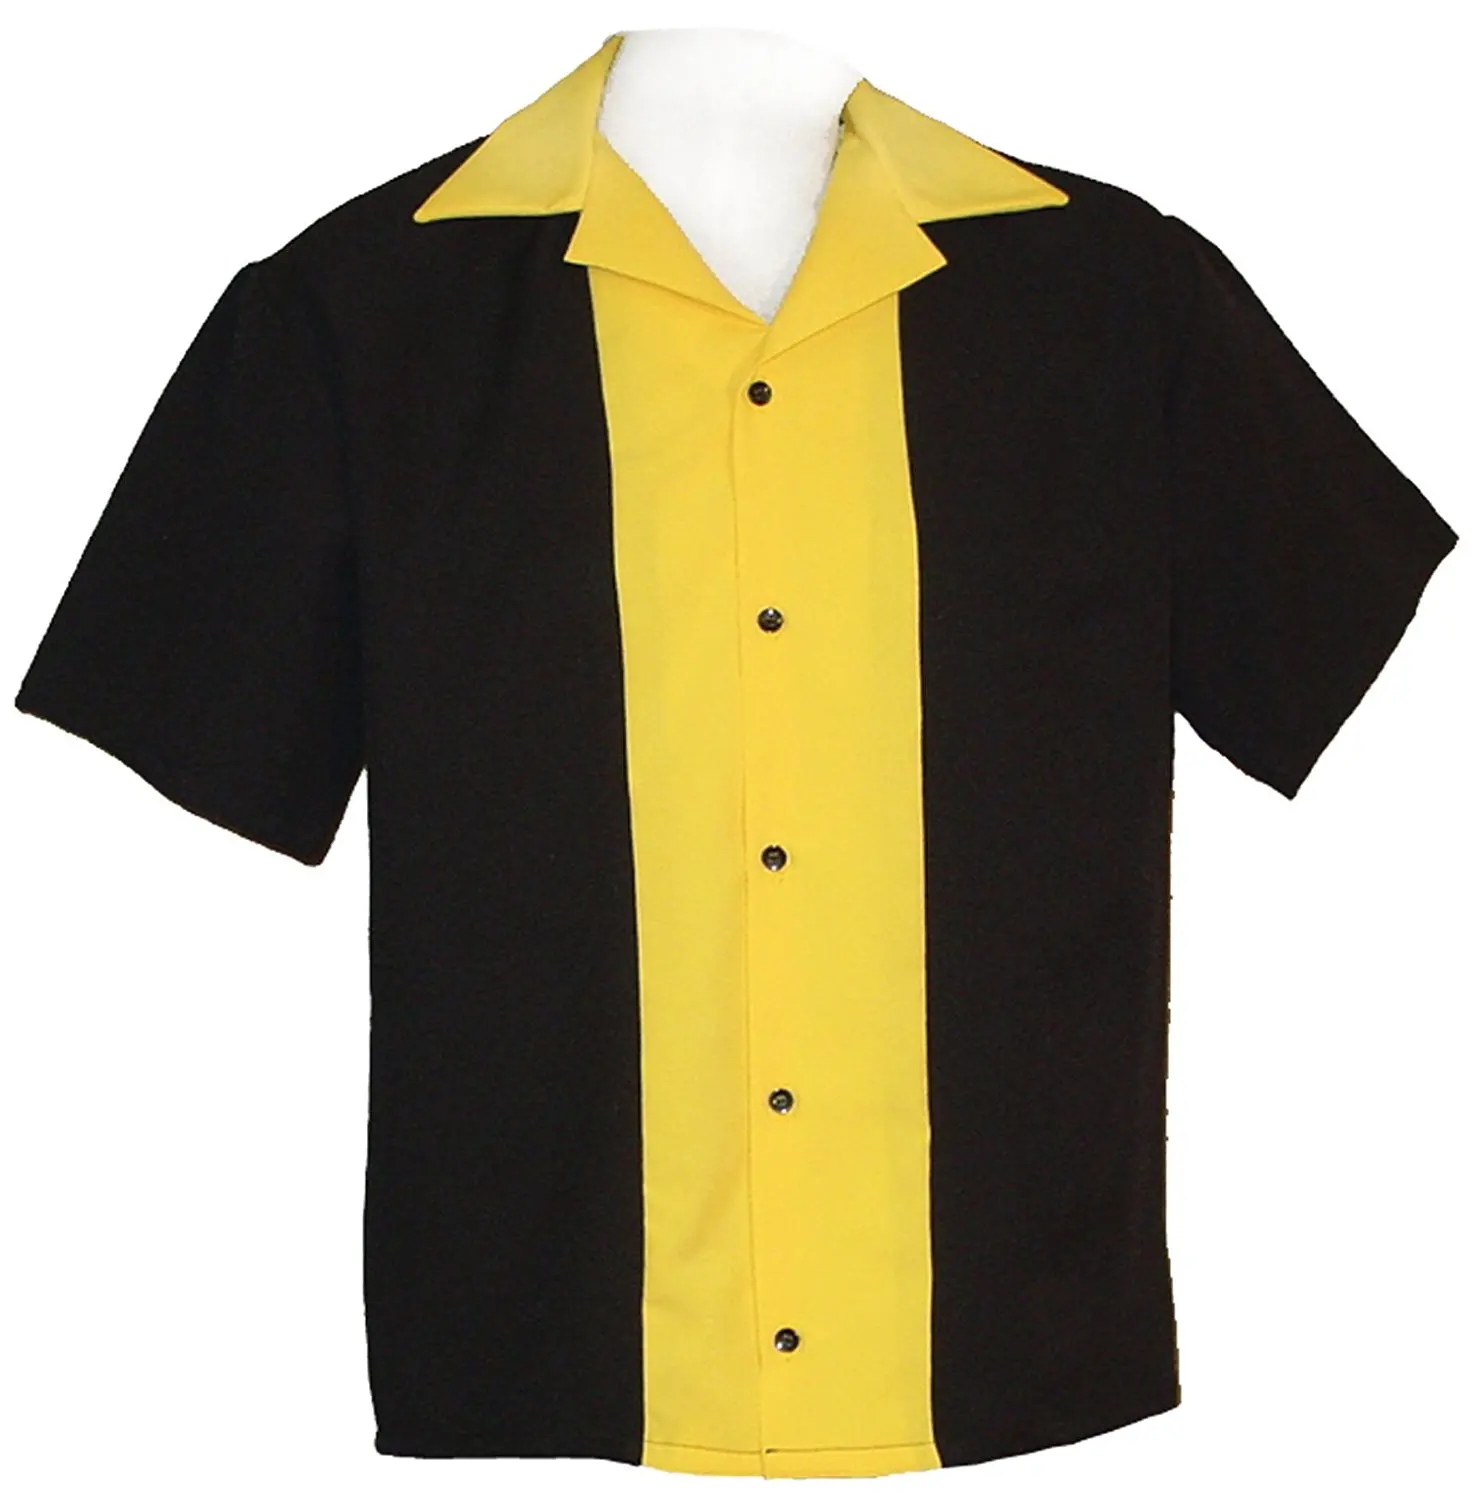 Cheap Youth Bowling Shirts, find Youth Bowling Shirts deals on line at ...